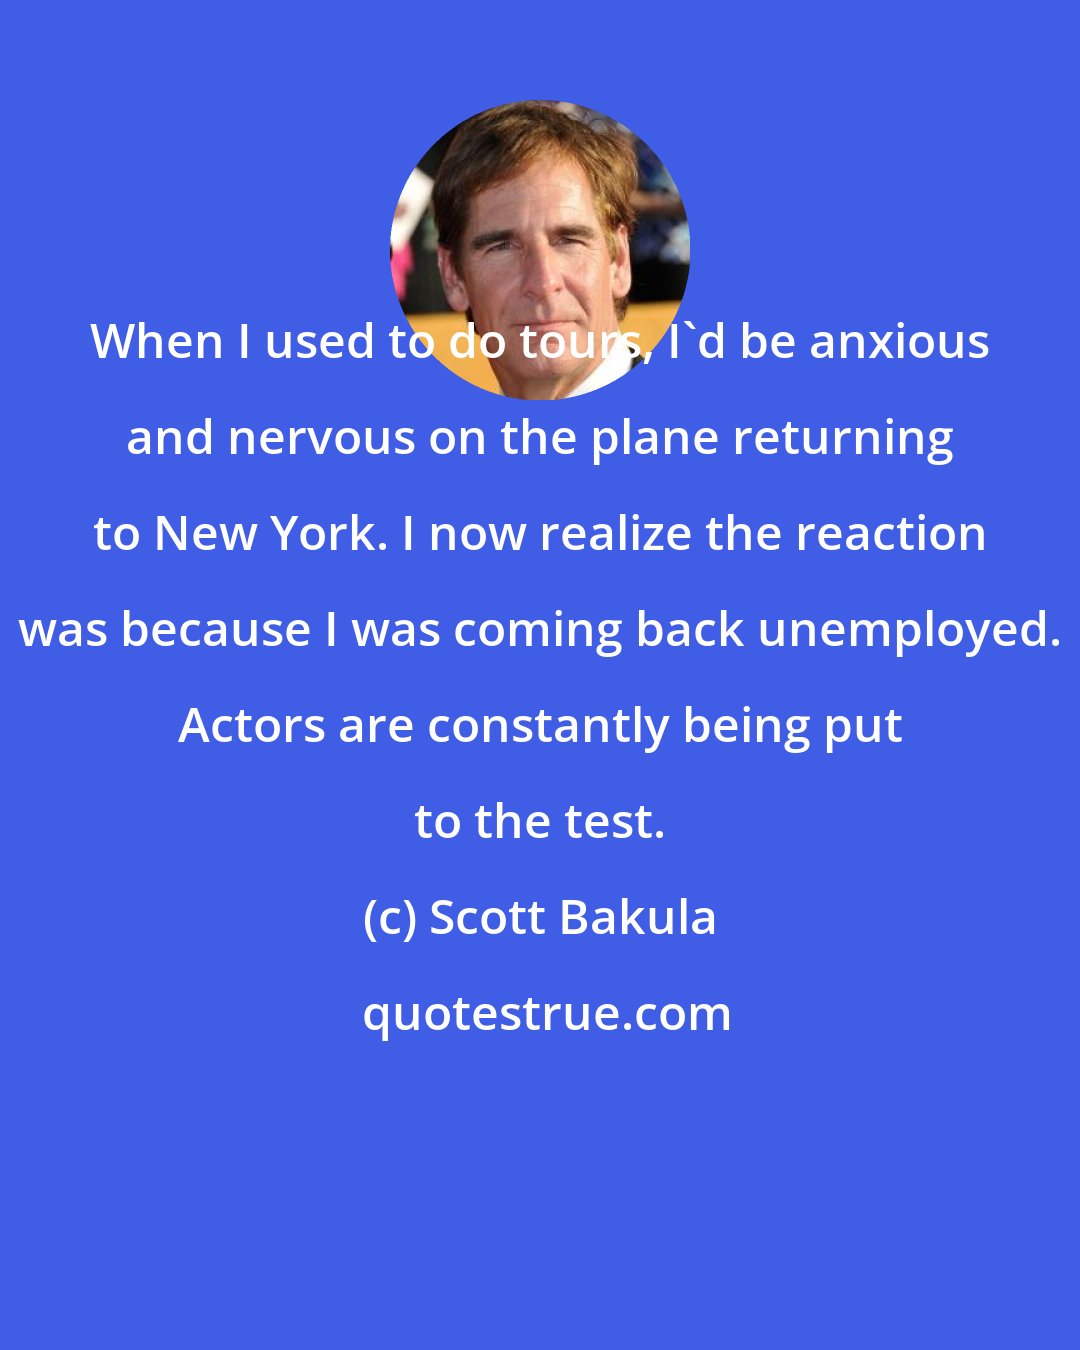 Scott Bakula: When I used to do tours, I'd be anxious and nervous on the plane returning to New York. I now realize the reaction was because I was coming back unemployed. Actors are constantly being put to the test.